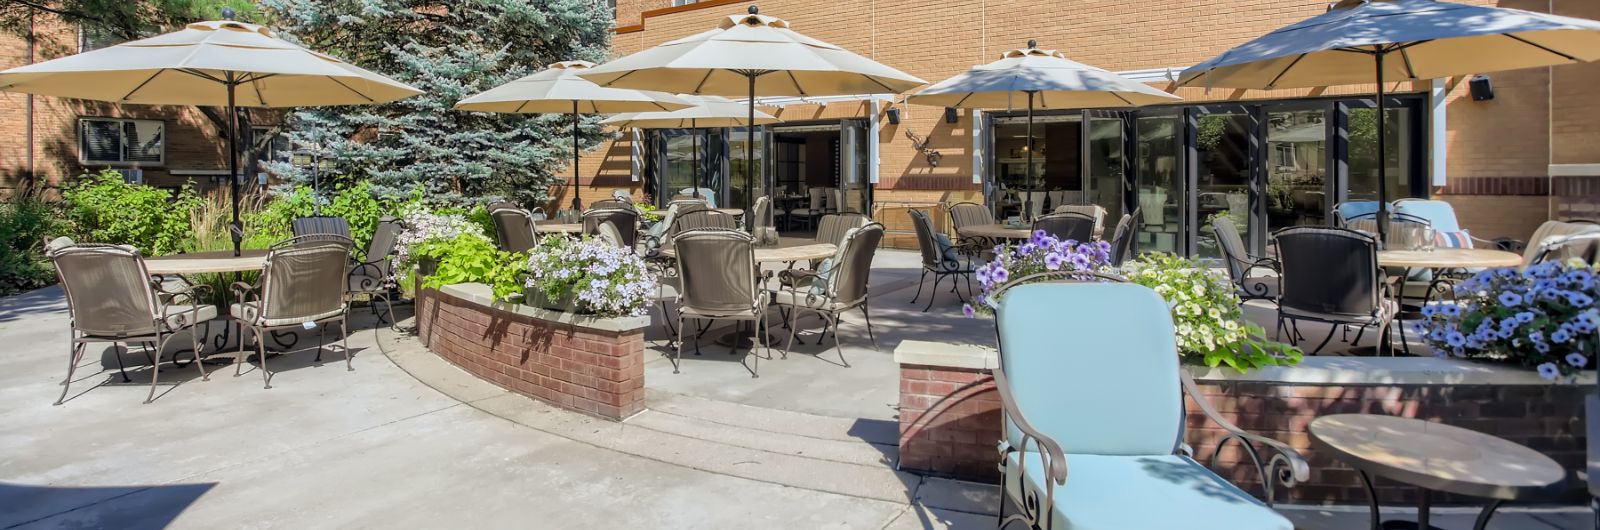 Clermont Park Senior Living Community in Denver, CO - where to begin finding the right community